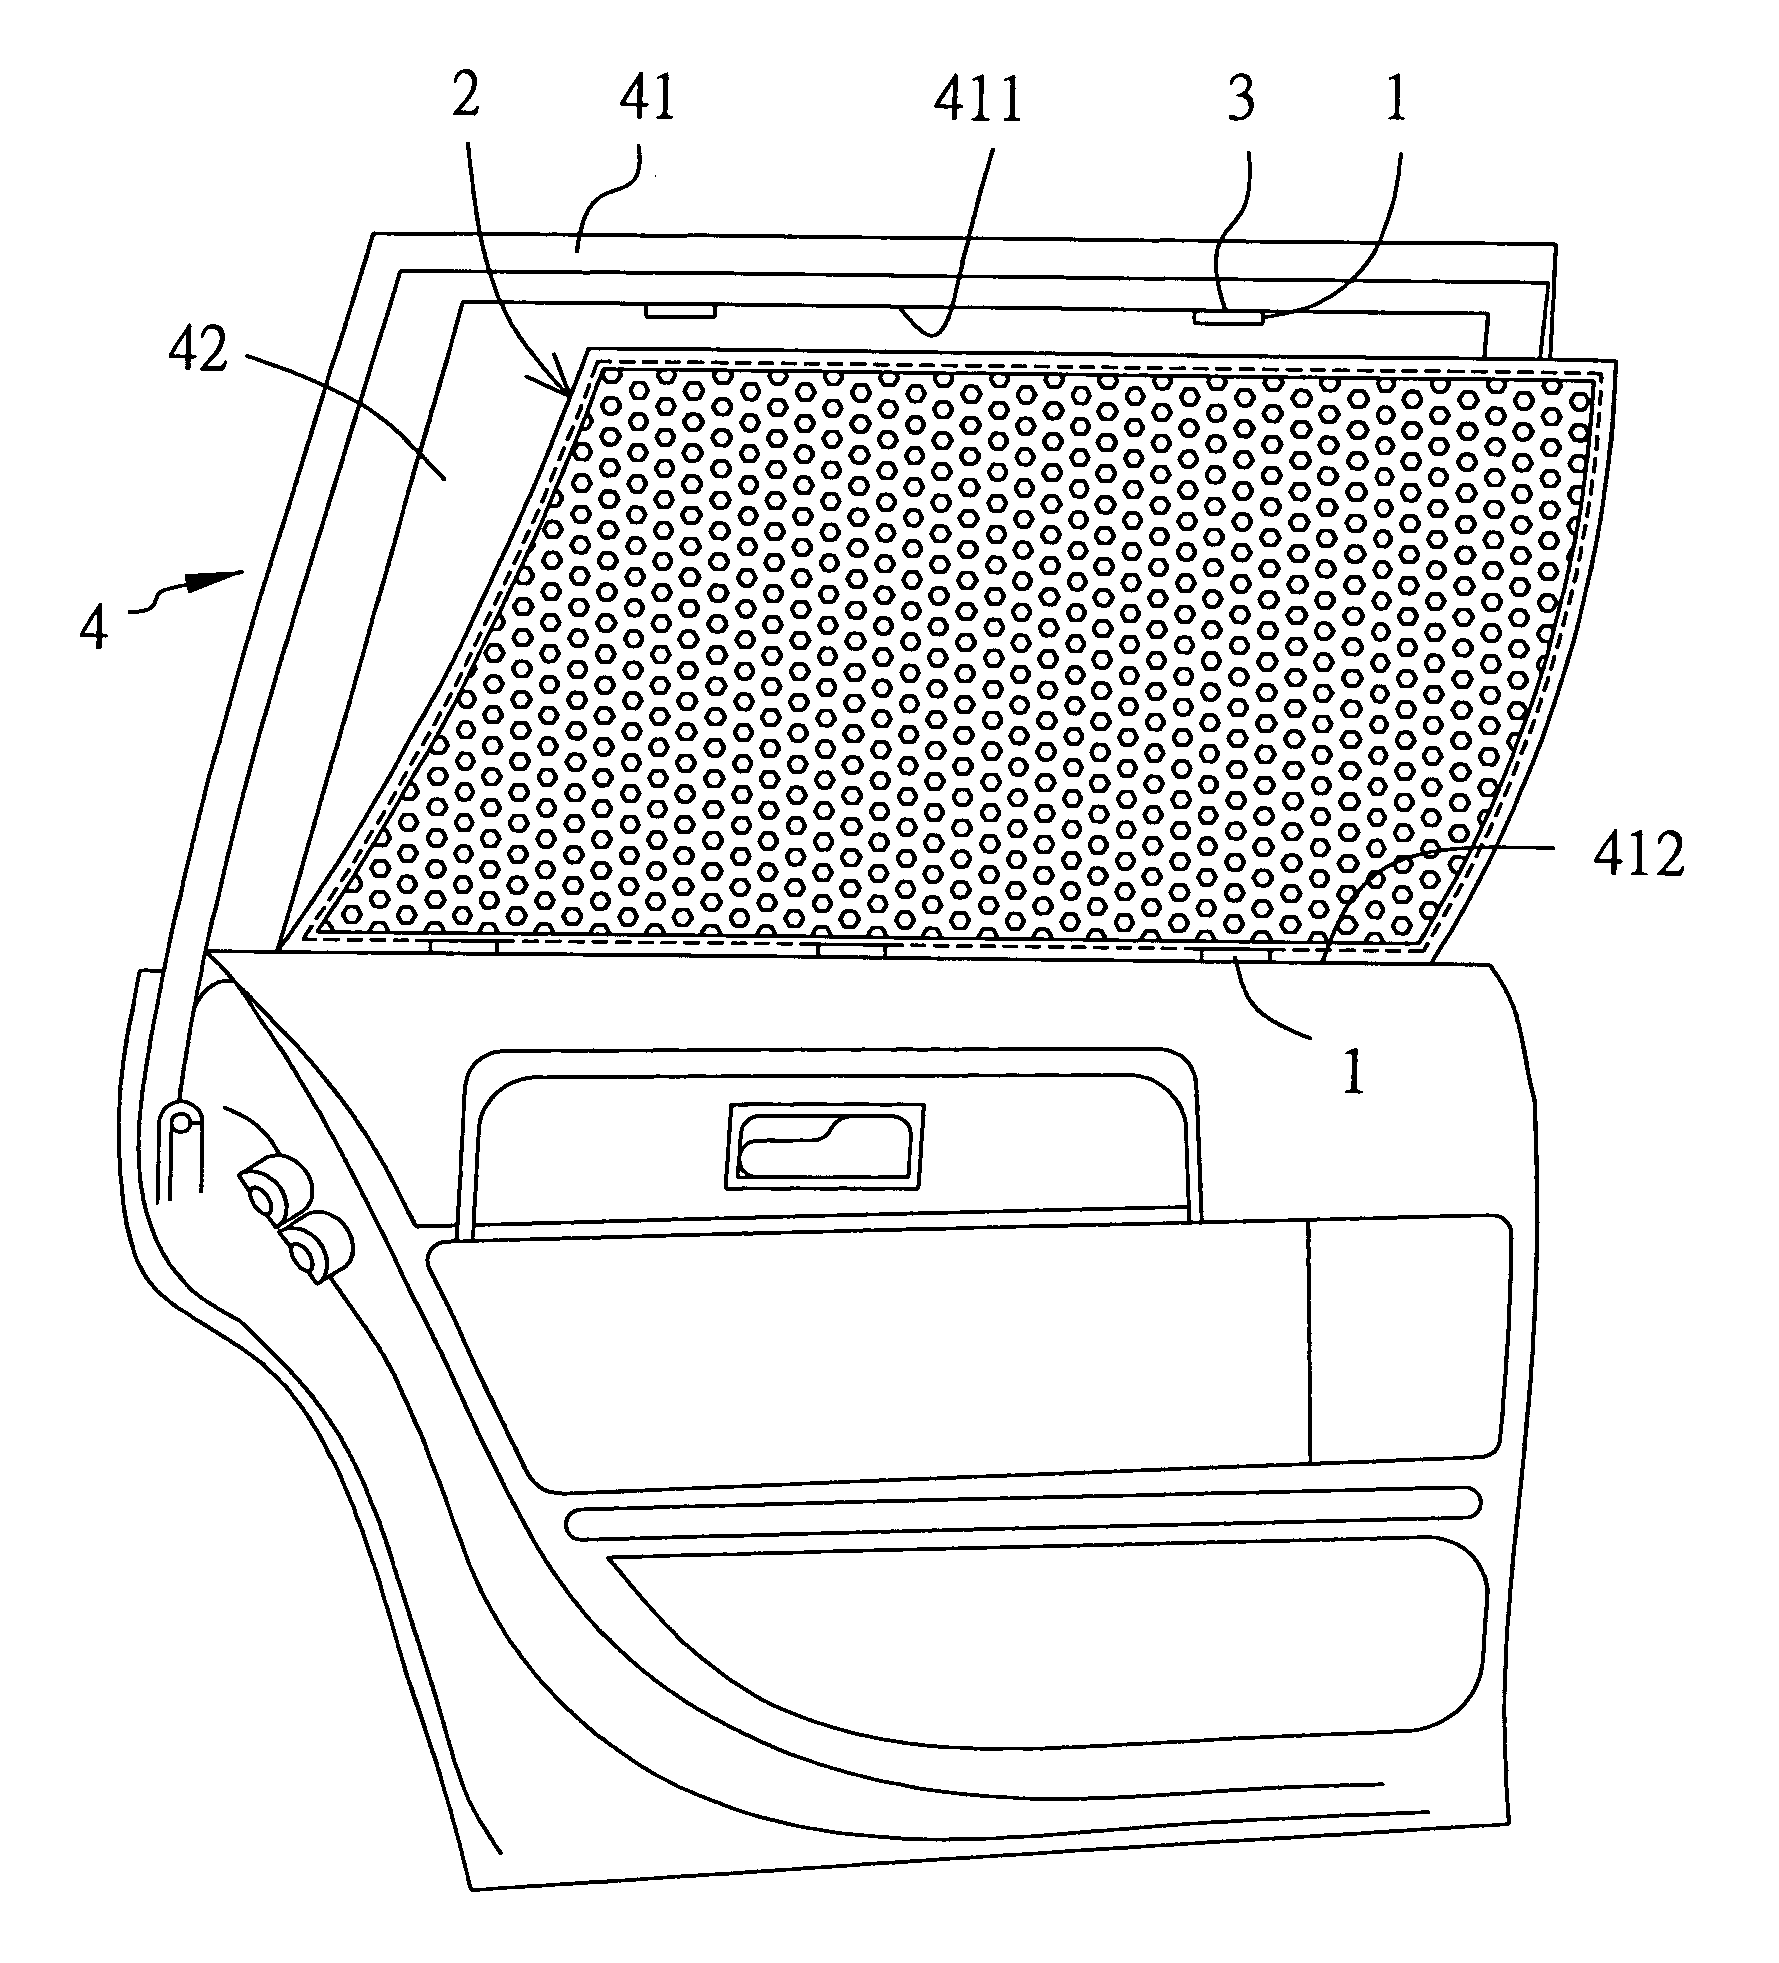 Shade assembly for automobile window